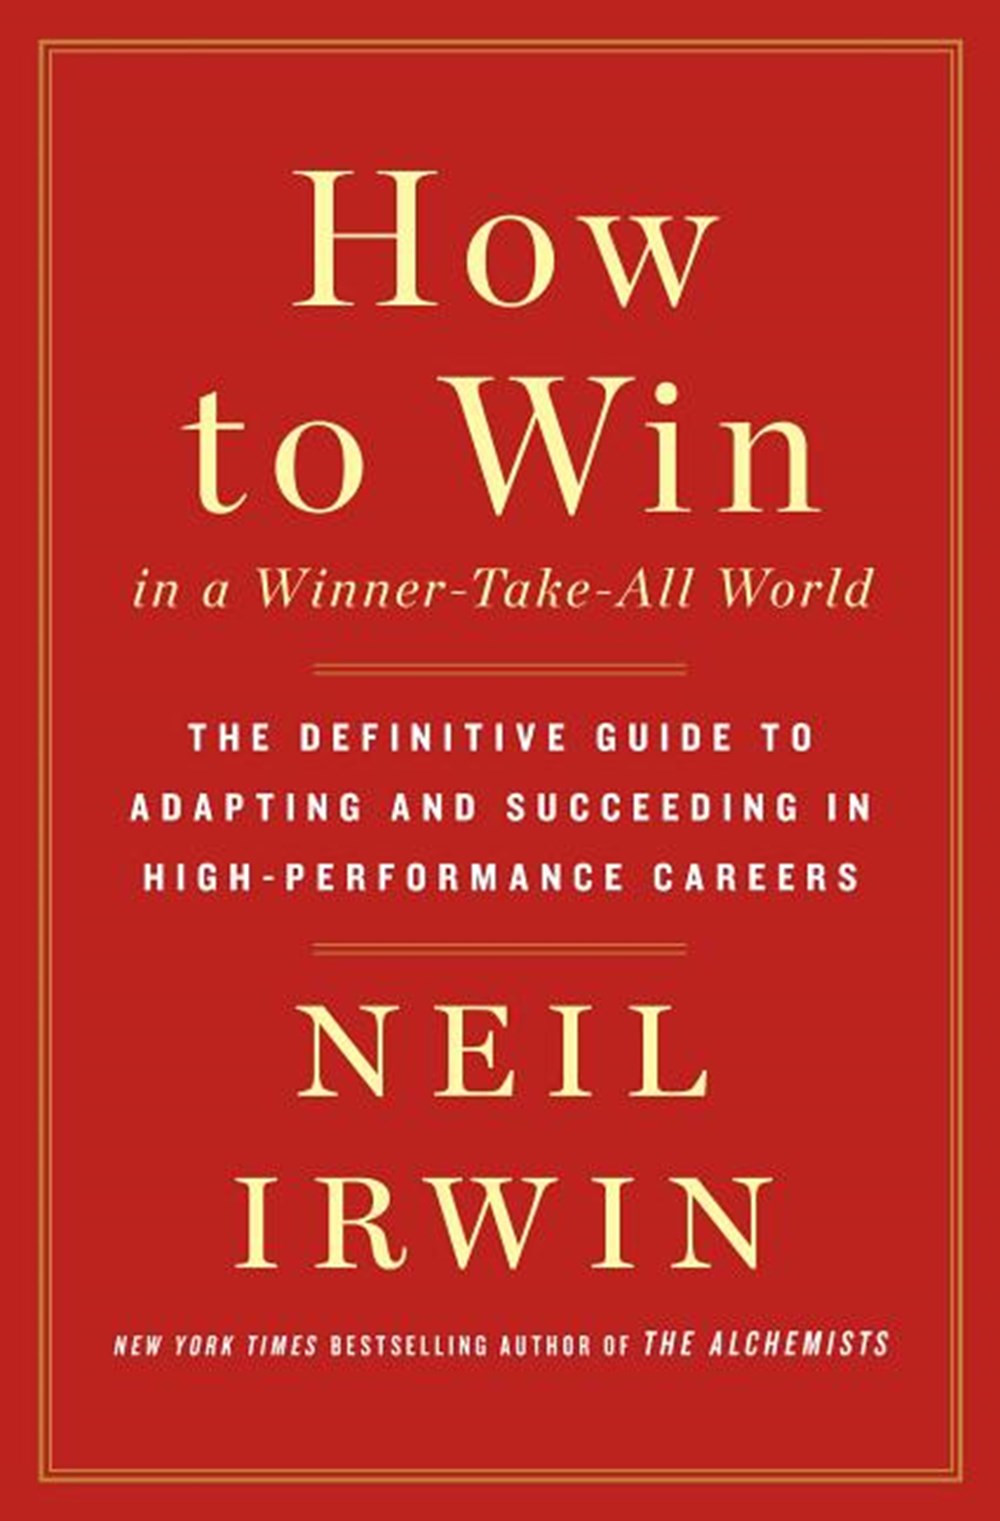 How to Win in a Winner-Take-All World The Definitive Guide to Adapting and Succeeding in High-Perfor